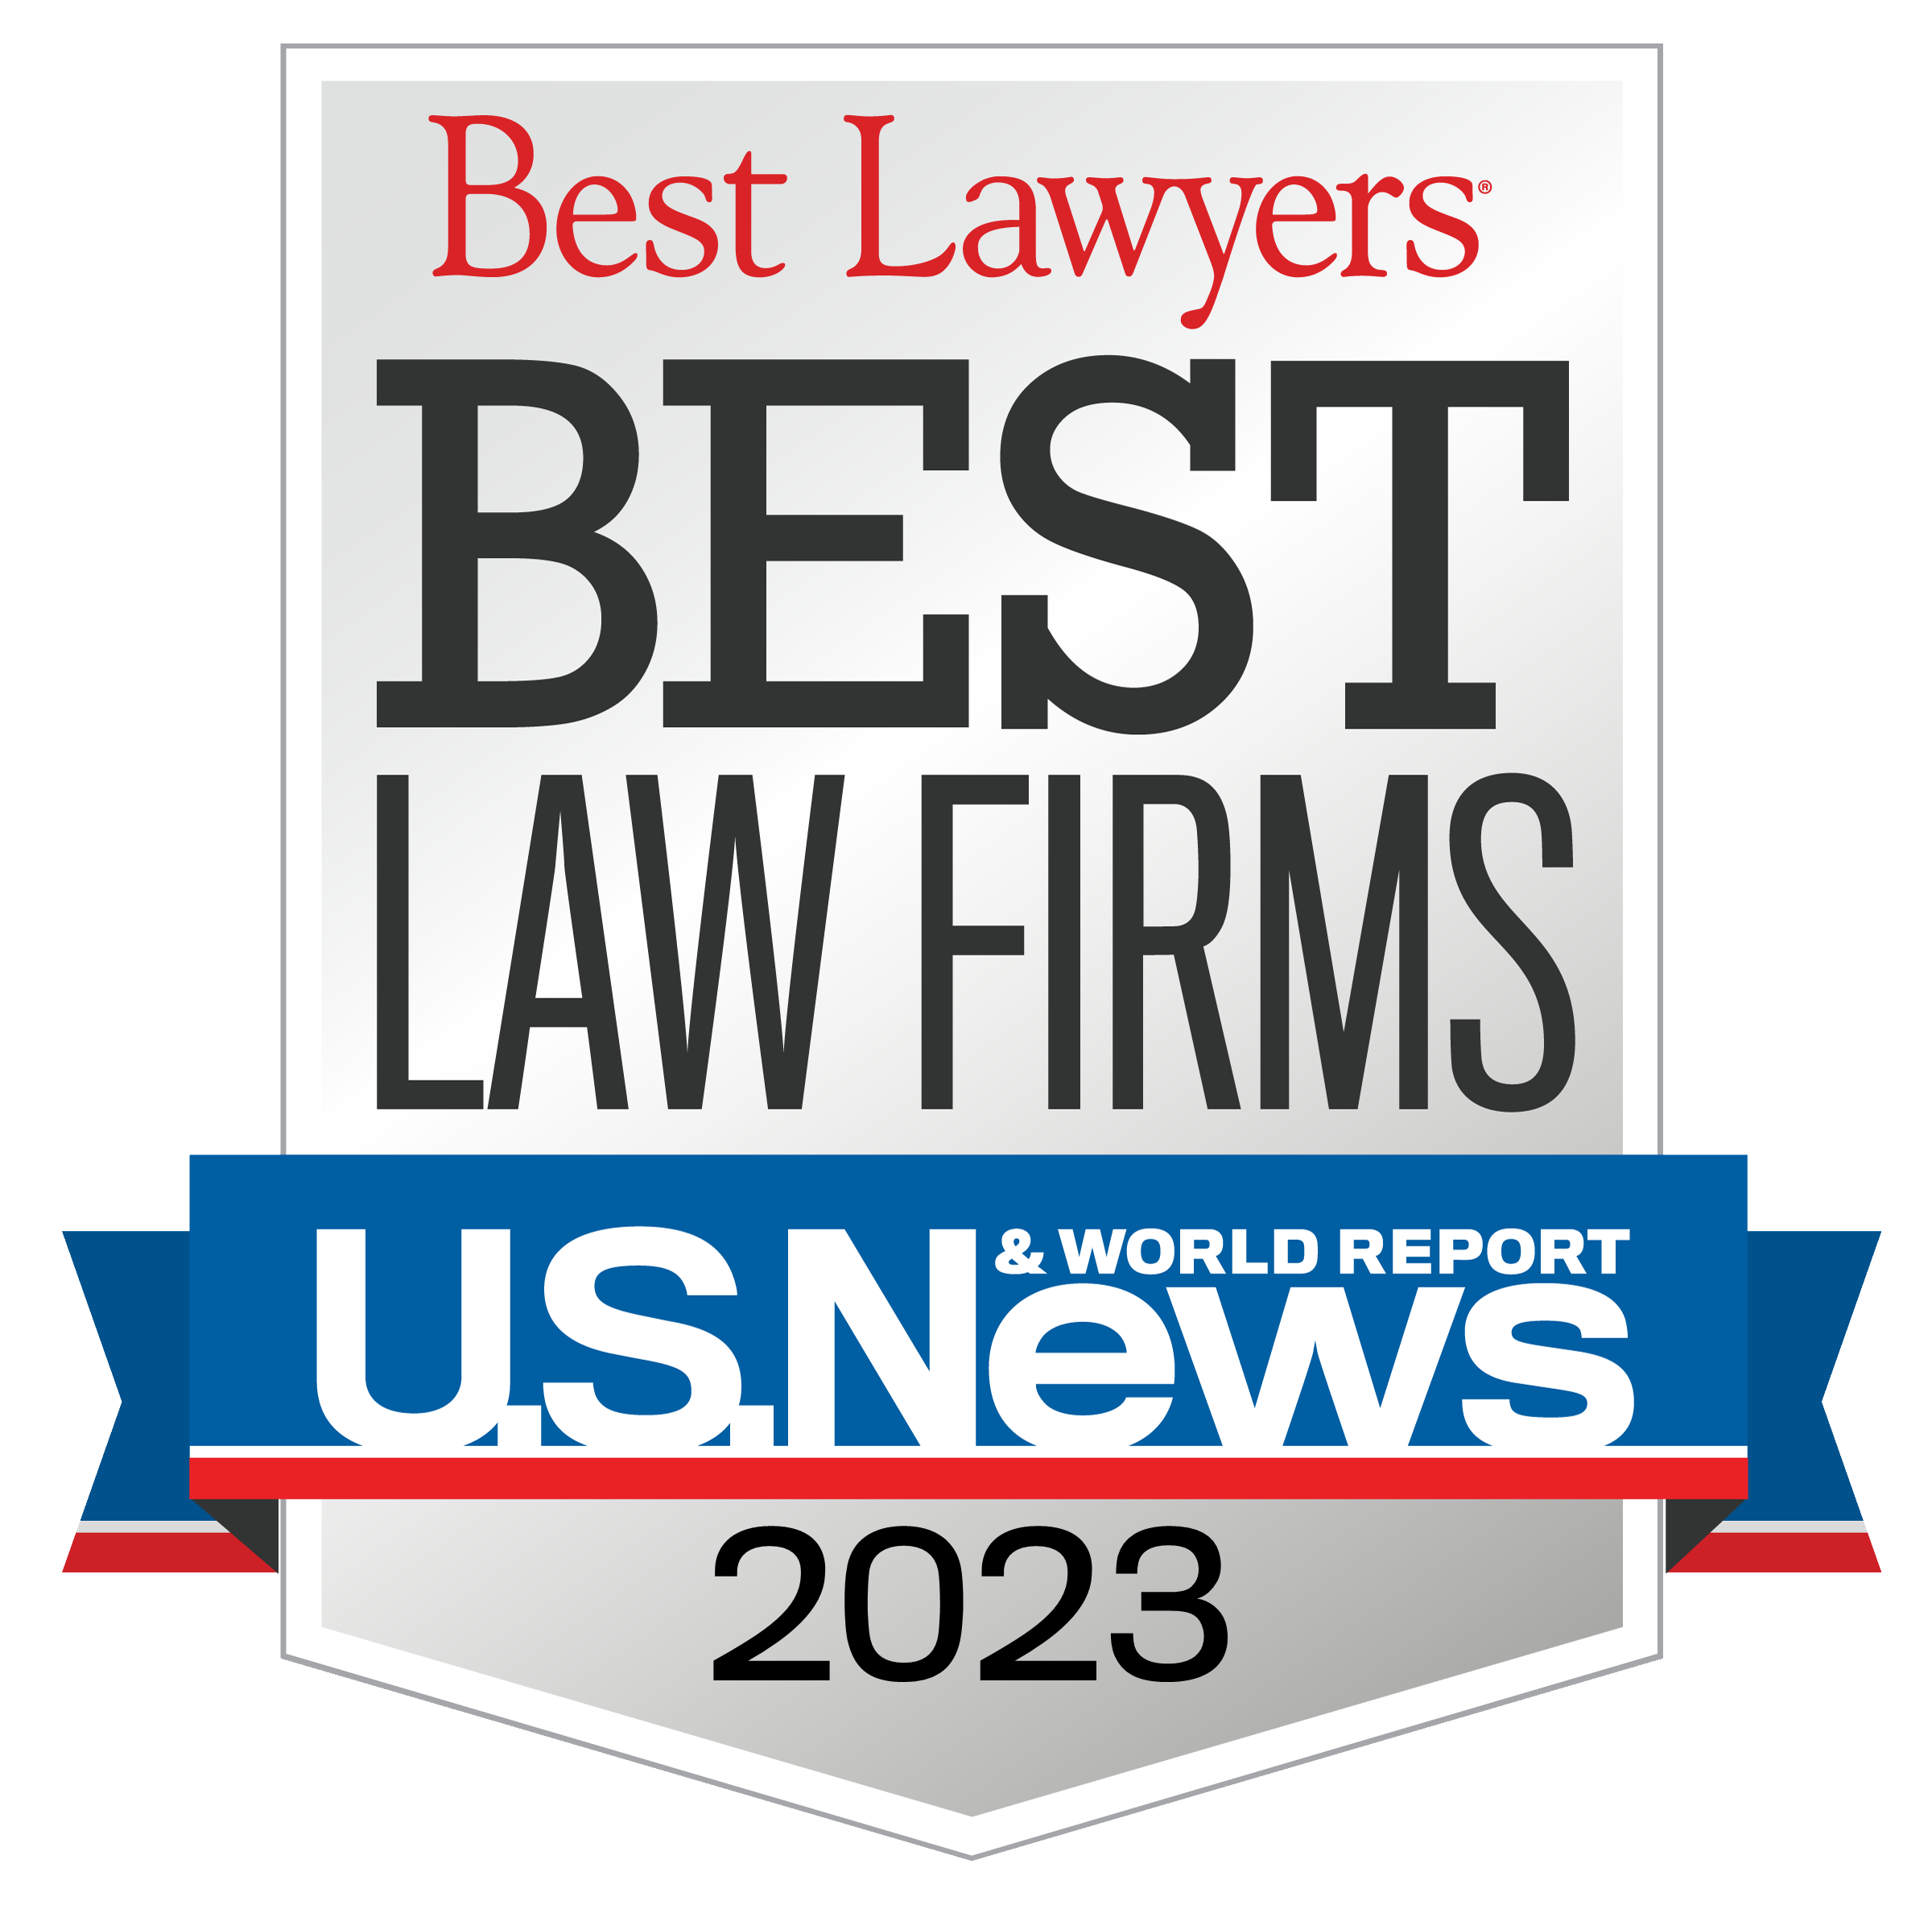 Landau and Simon named Best Lawyers Best Law Firms by US News and World Reports 2023